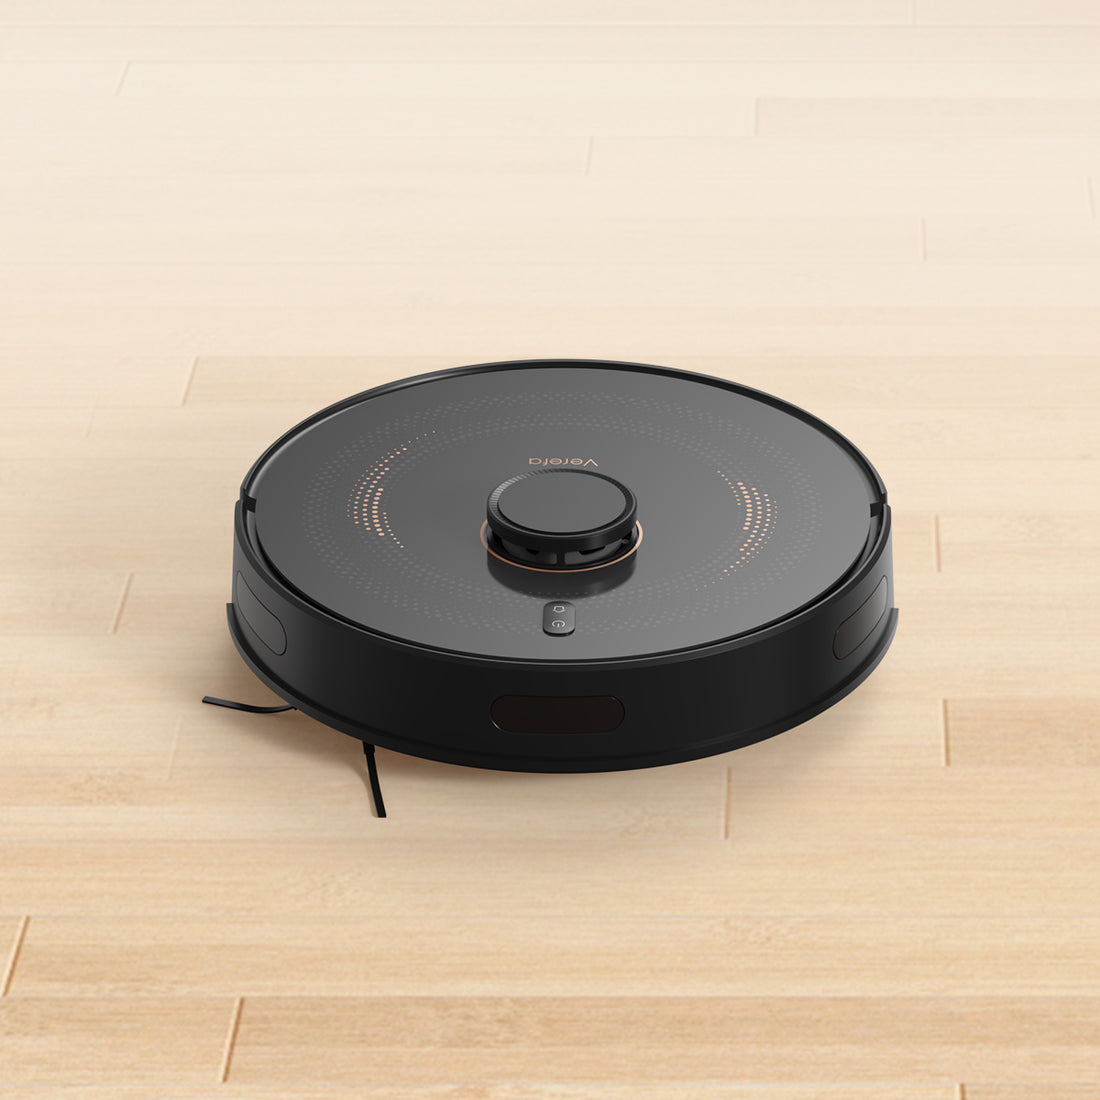 Make the most of your time with the world’s best value robot vacuum